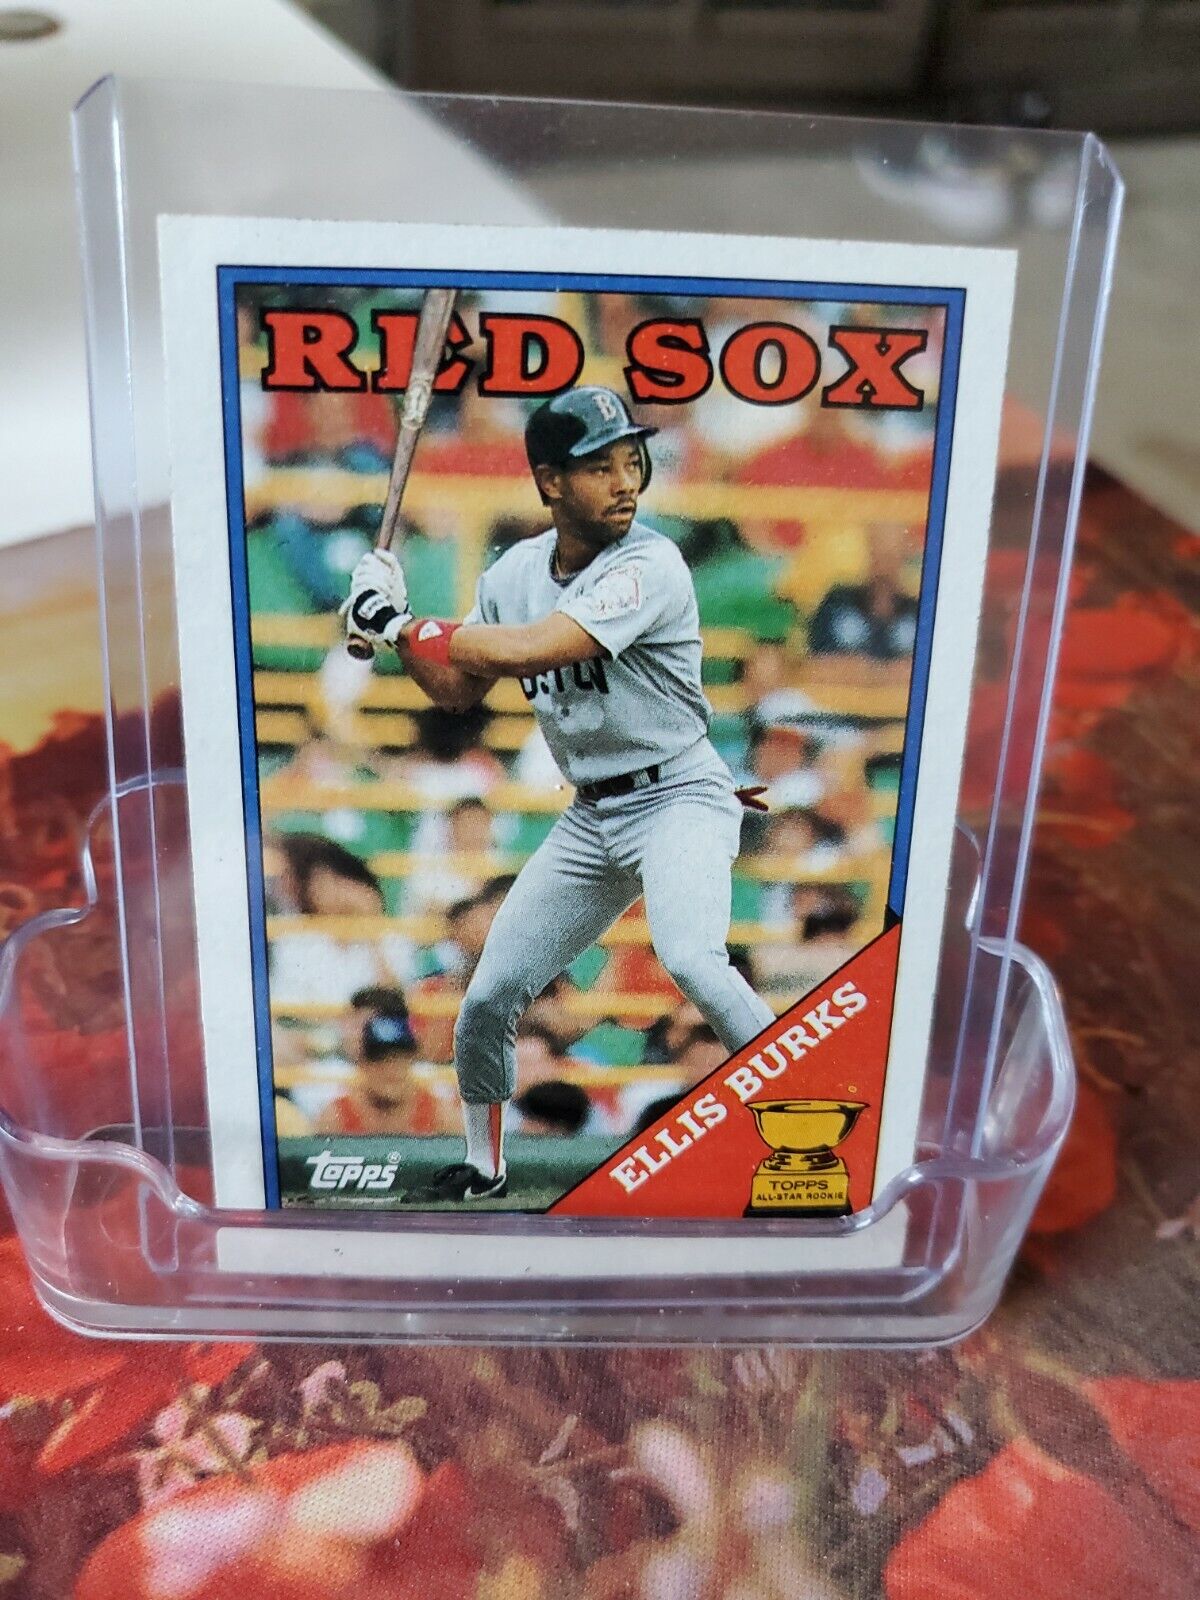 1988 topps ellis burks #269 all star rookie card mint condition 